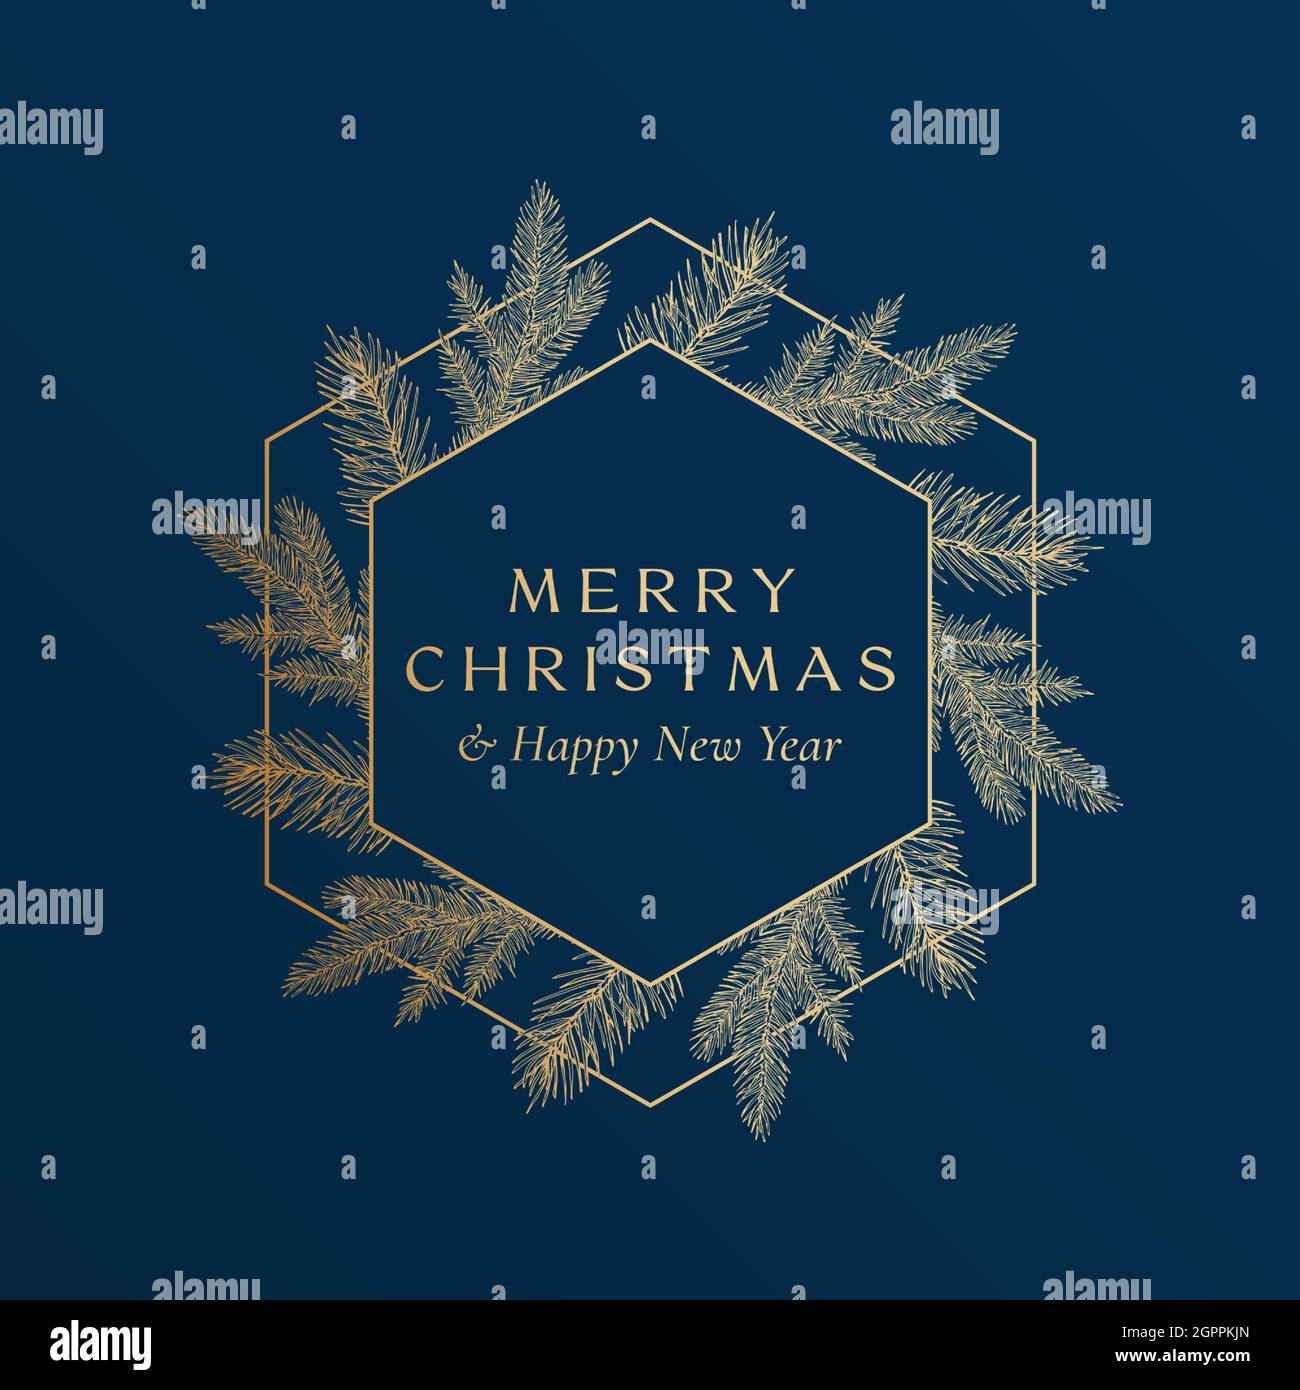 Christmas Greetings Golden Glitter Hexagon Frame Banner with Modern Typography and Hand Drawn Spruce Branches. Premium Quality New Year Sketch Card Stock Vector